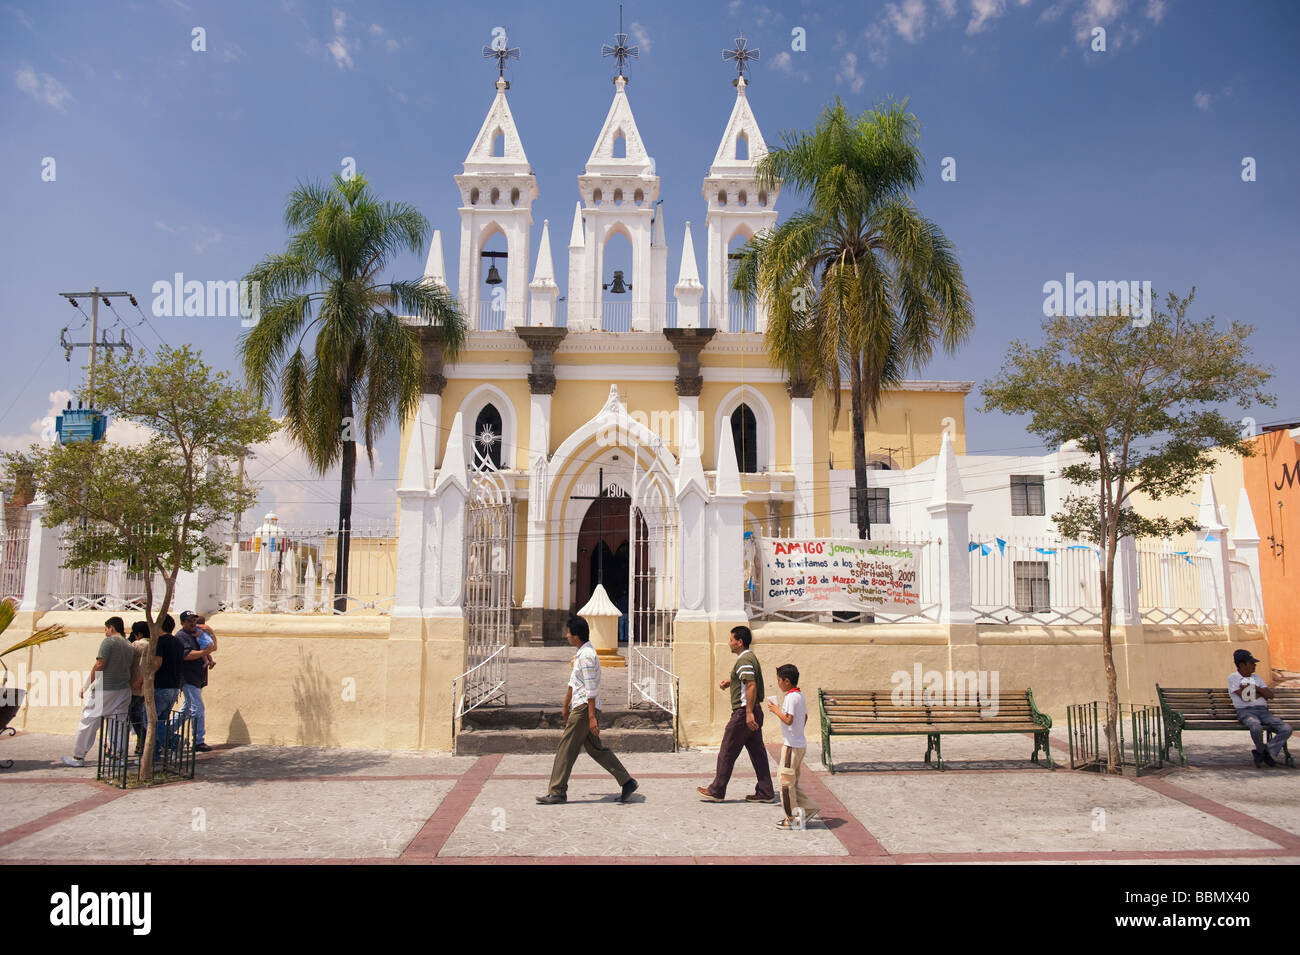 Triple spired Church in the centre on Tonala, Jalsico, Mexico Stock Photo